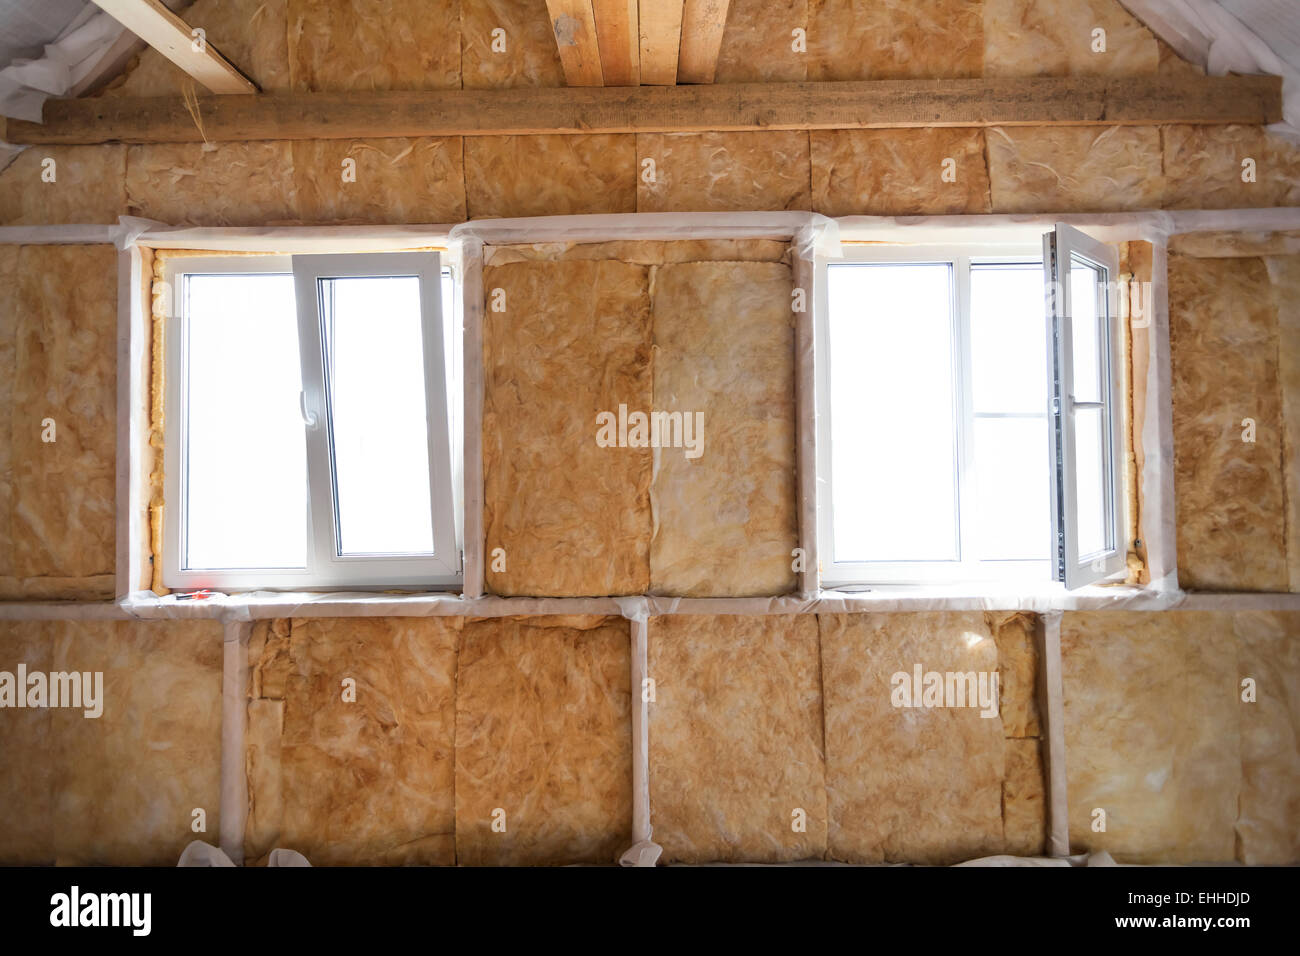 Mineral rock wool insulation material close-up for background Stock Photo -  Alamy